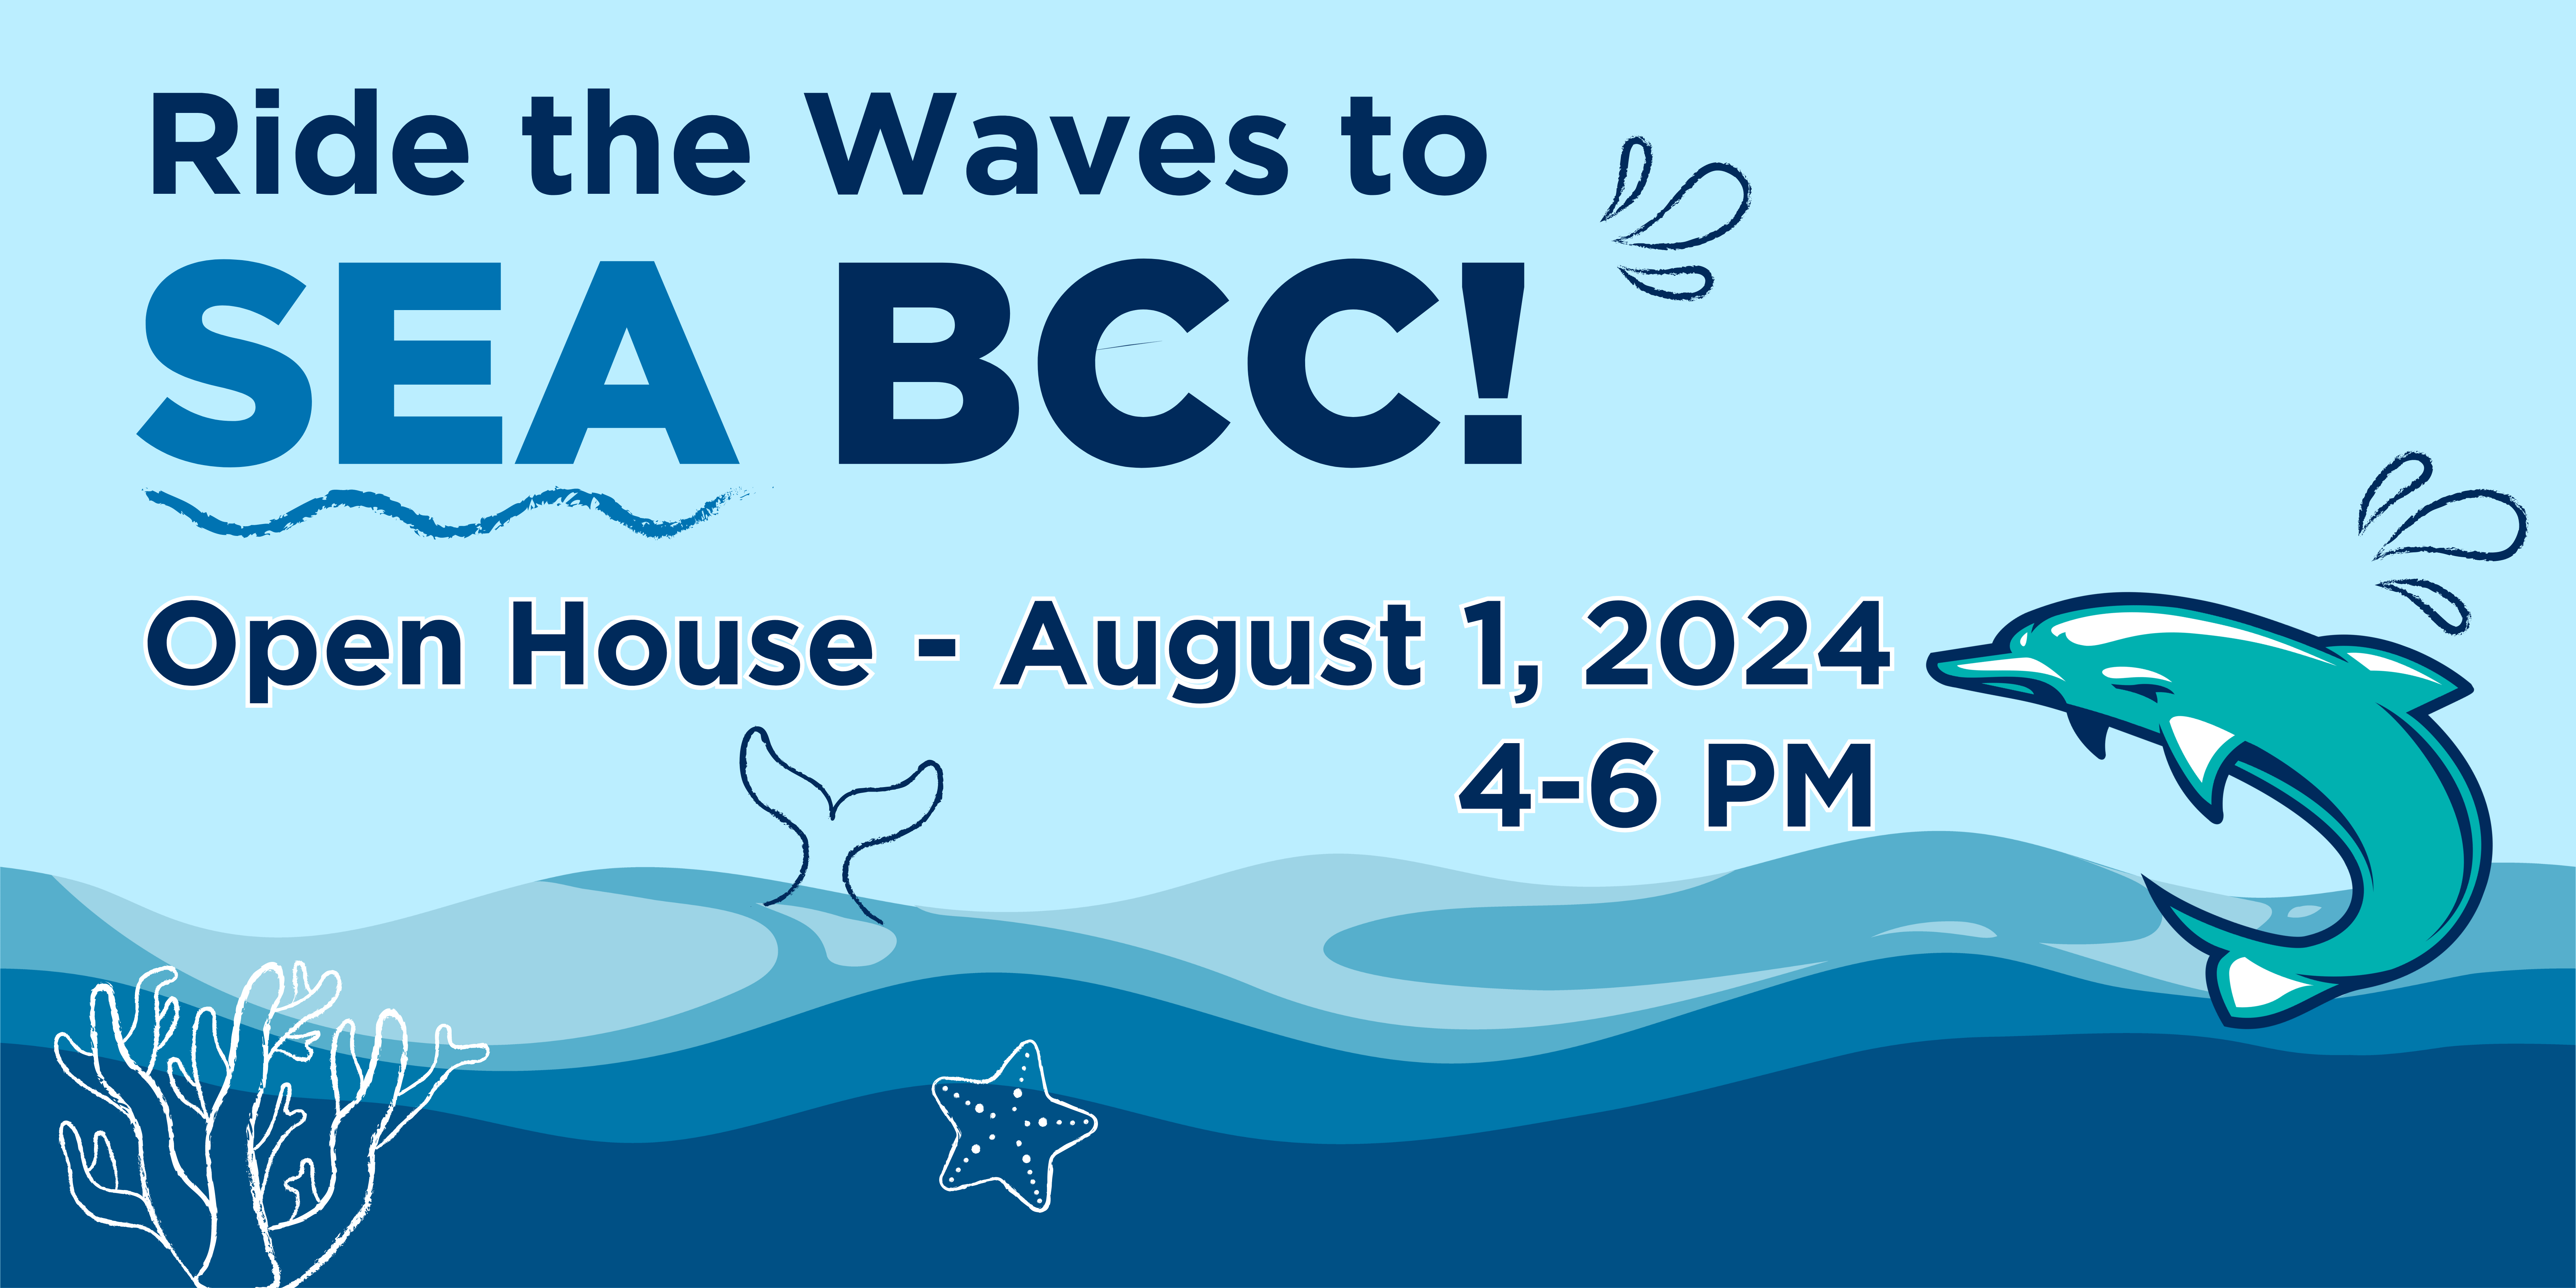 A sea-themed design promoting BCC's upcoming Open House event